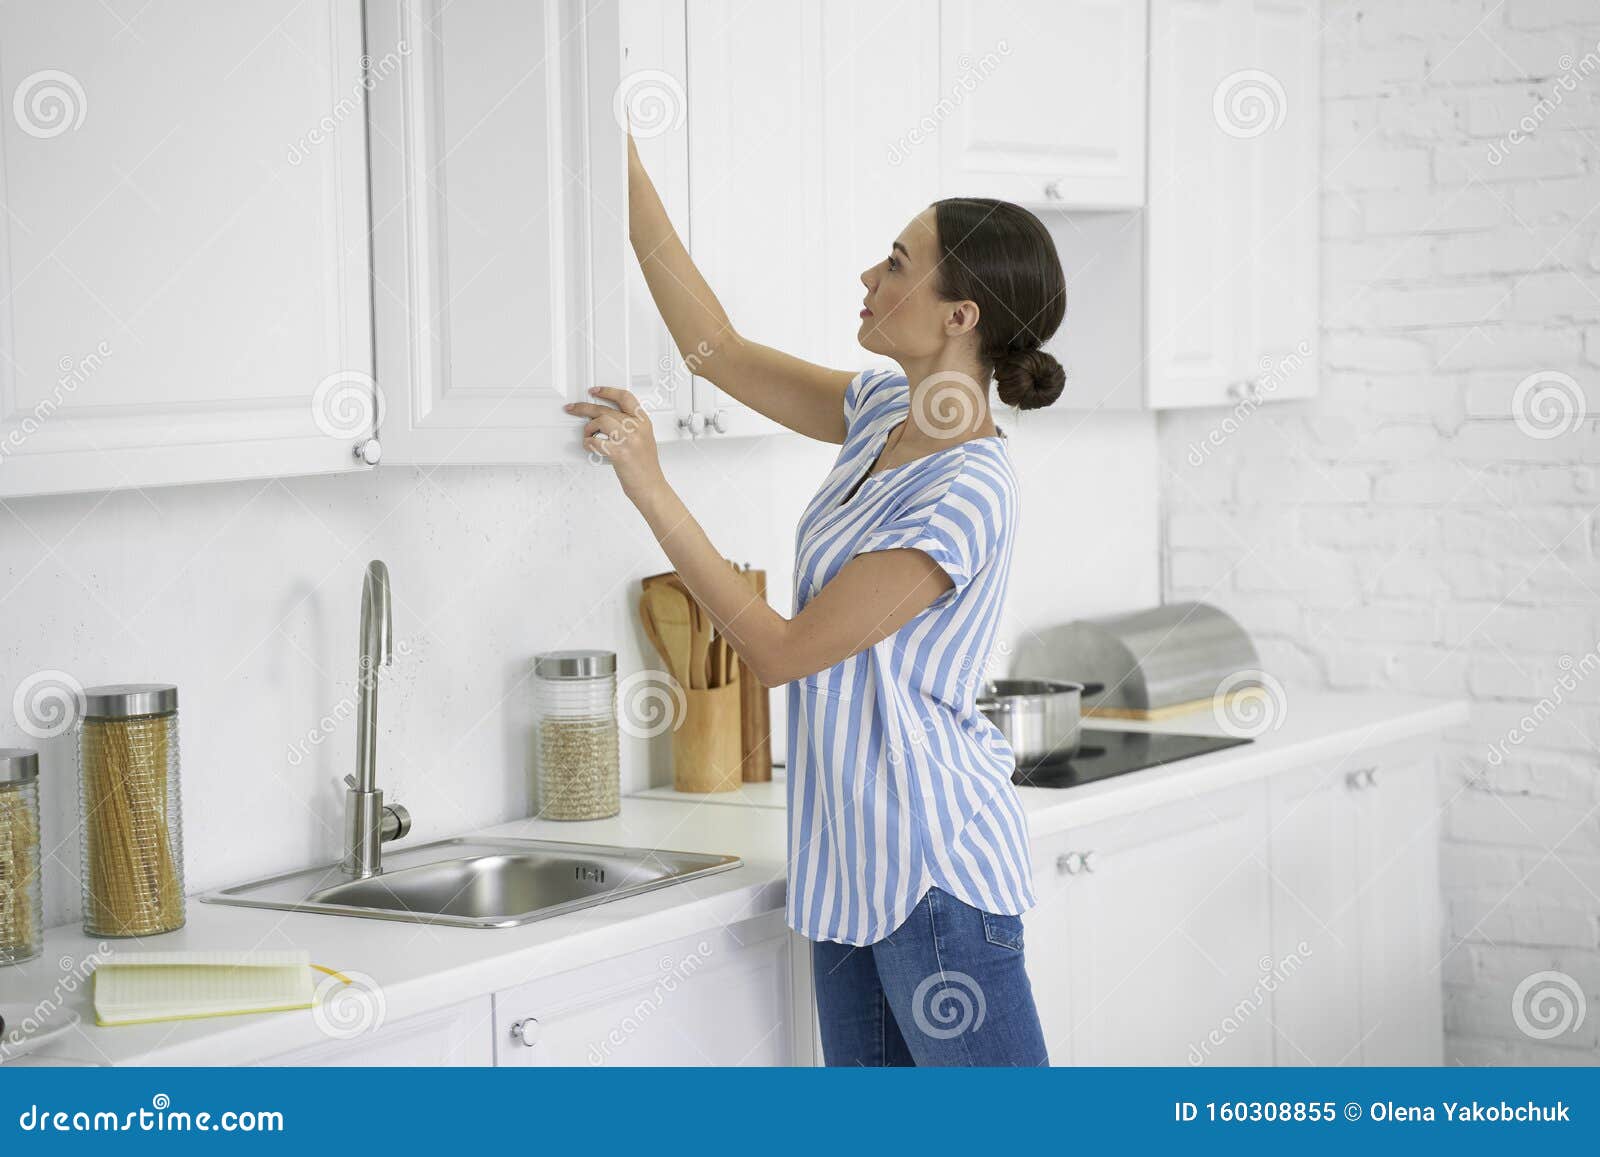 woman opening the kitchen cupboard stock photo